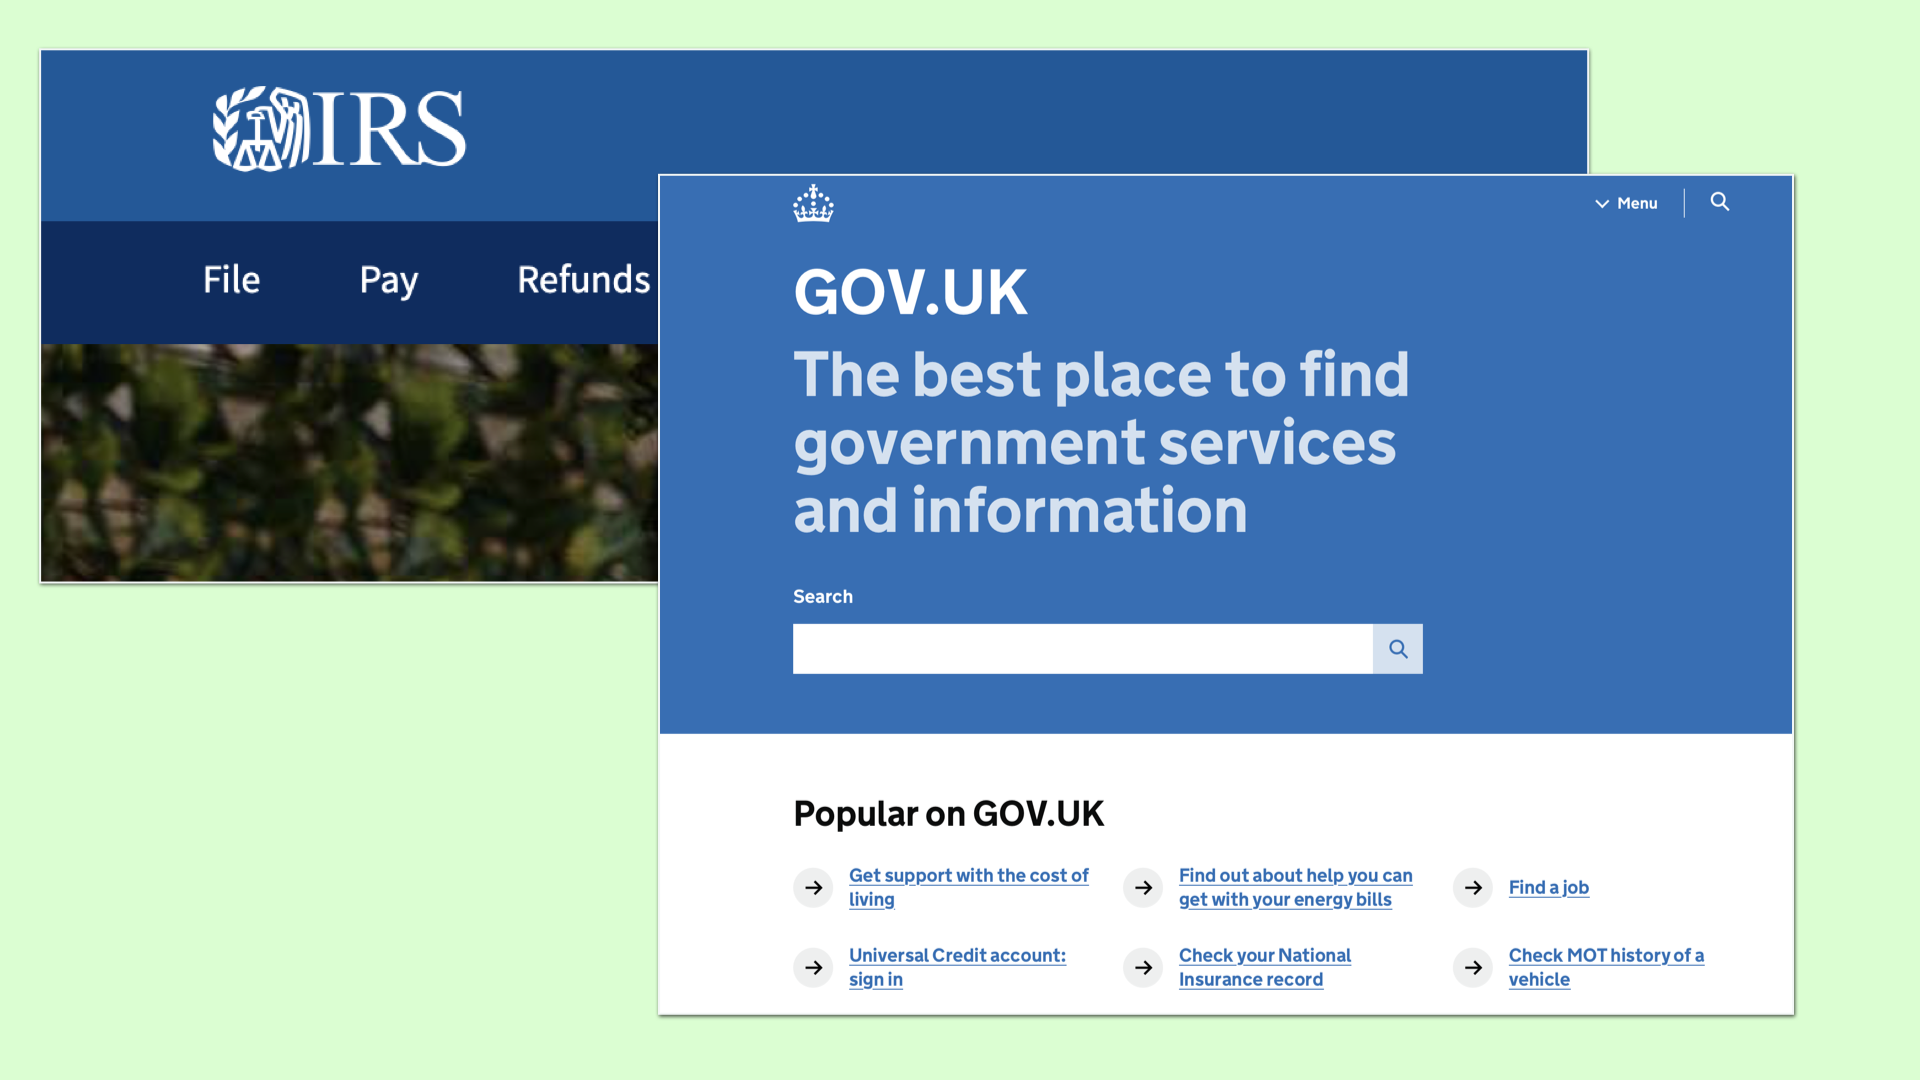 Gov.UK website homepage "above the fold" has a large headline and a search box.